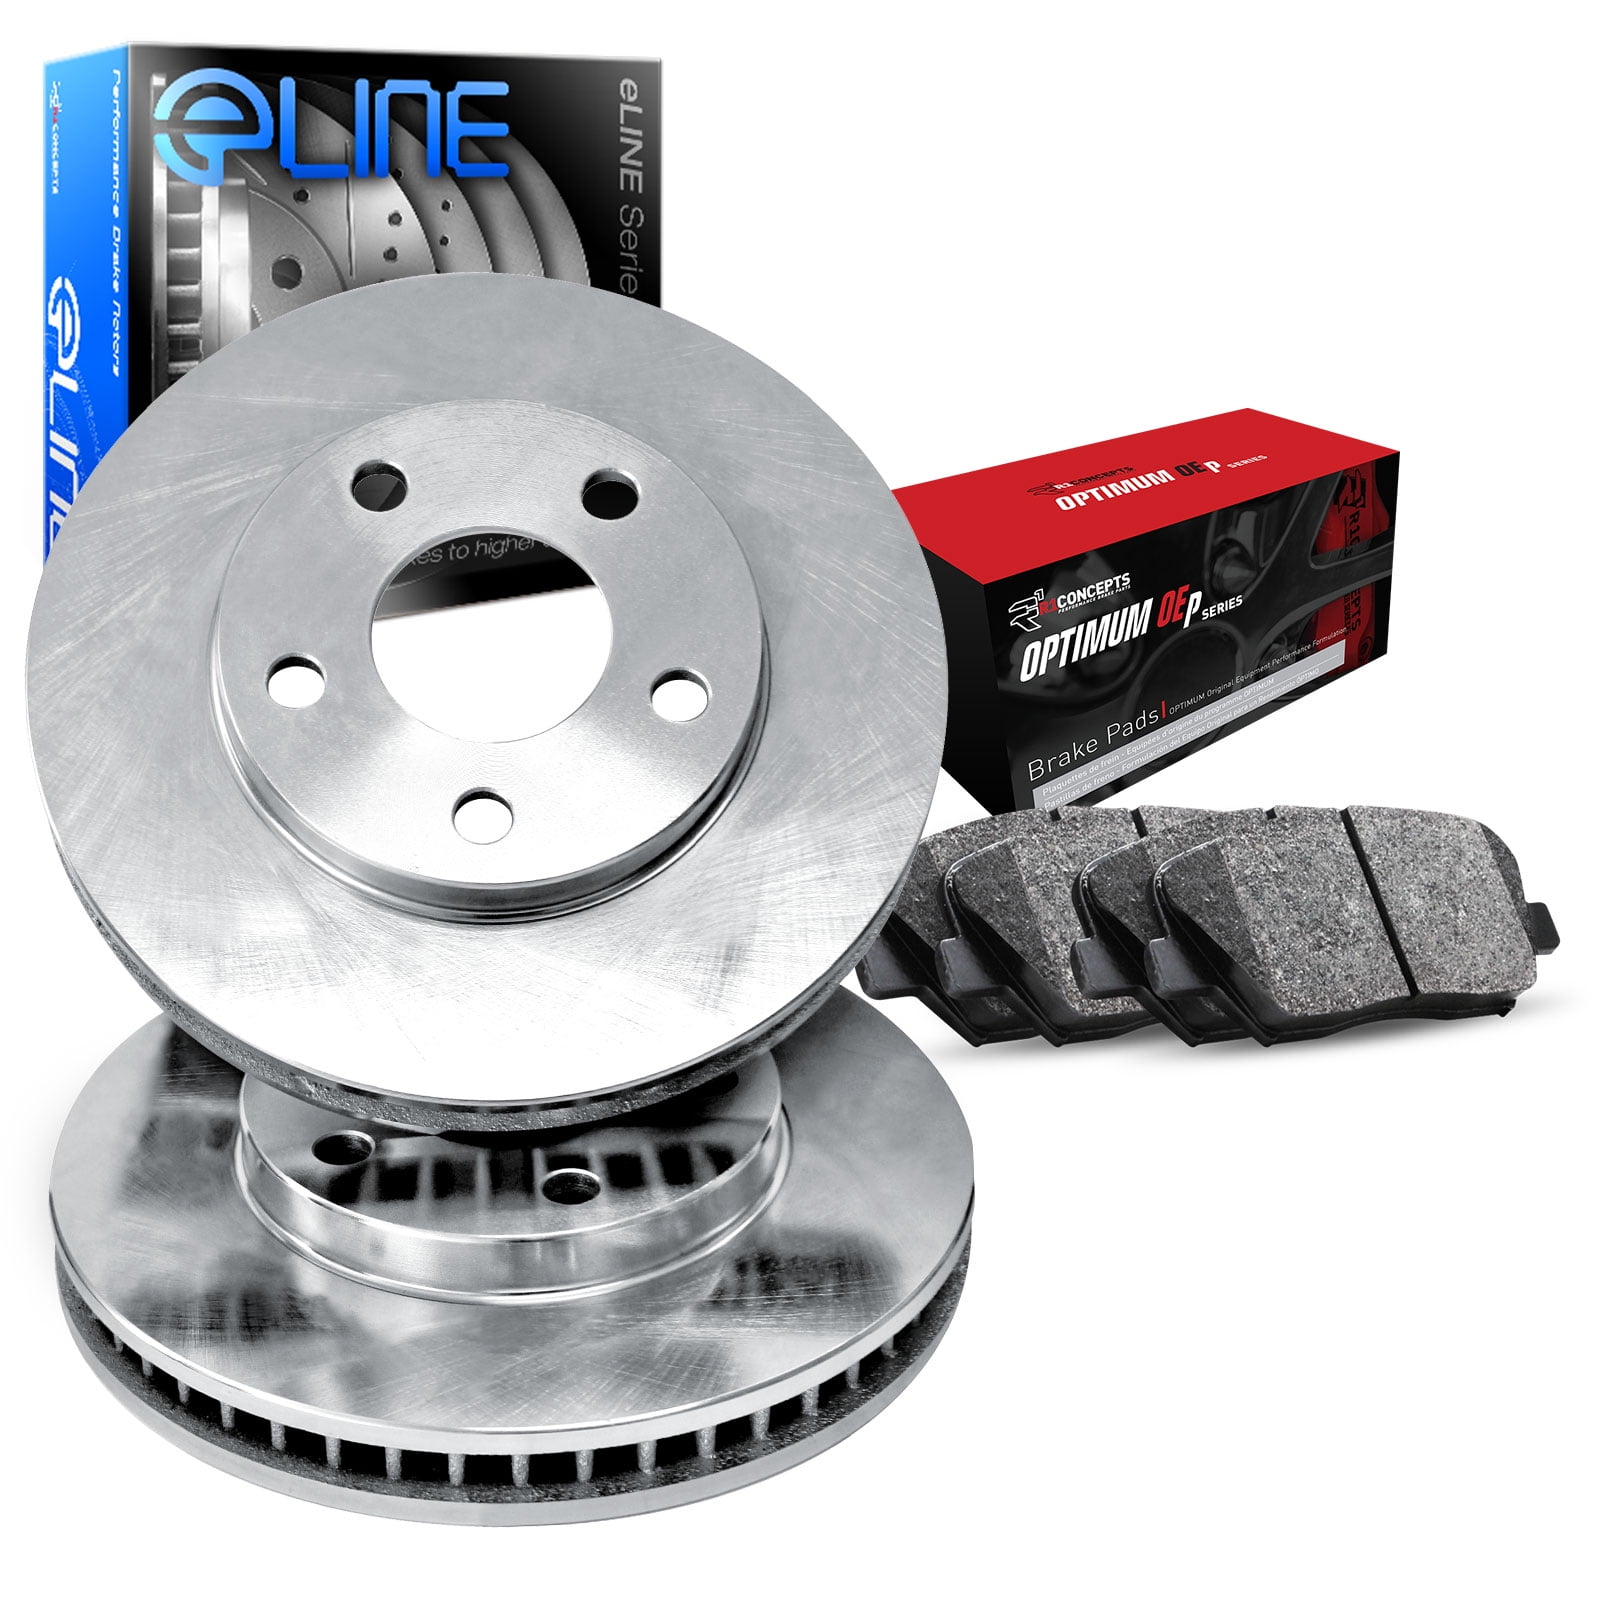 Ceramic Pads FRONT 2005-2015 2016 Ford F-450 Super Duty Drilled Brake Rotors